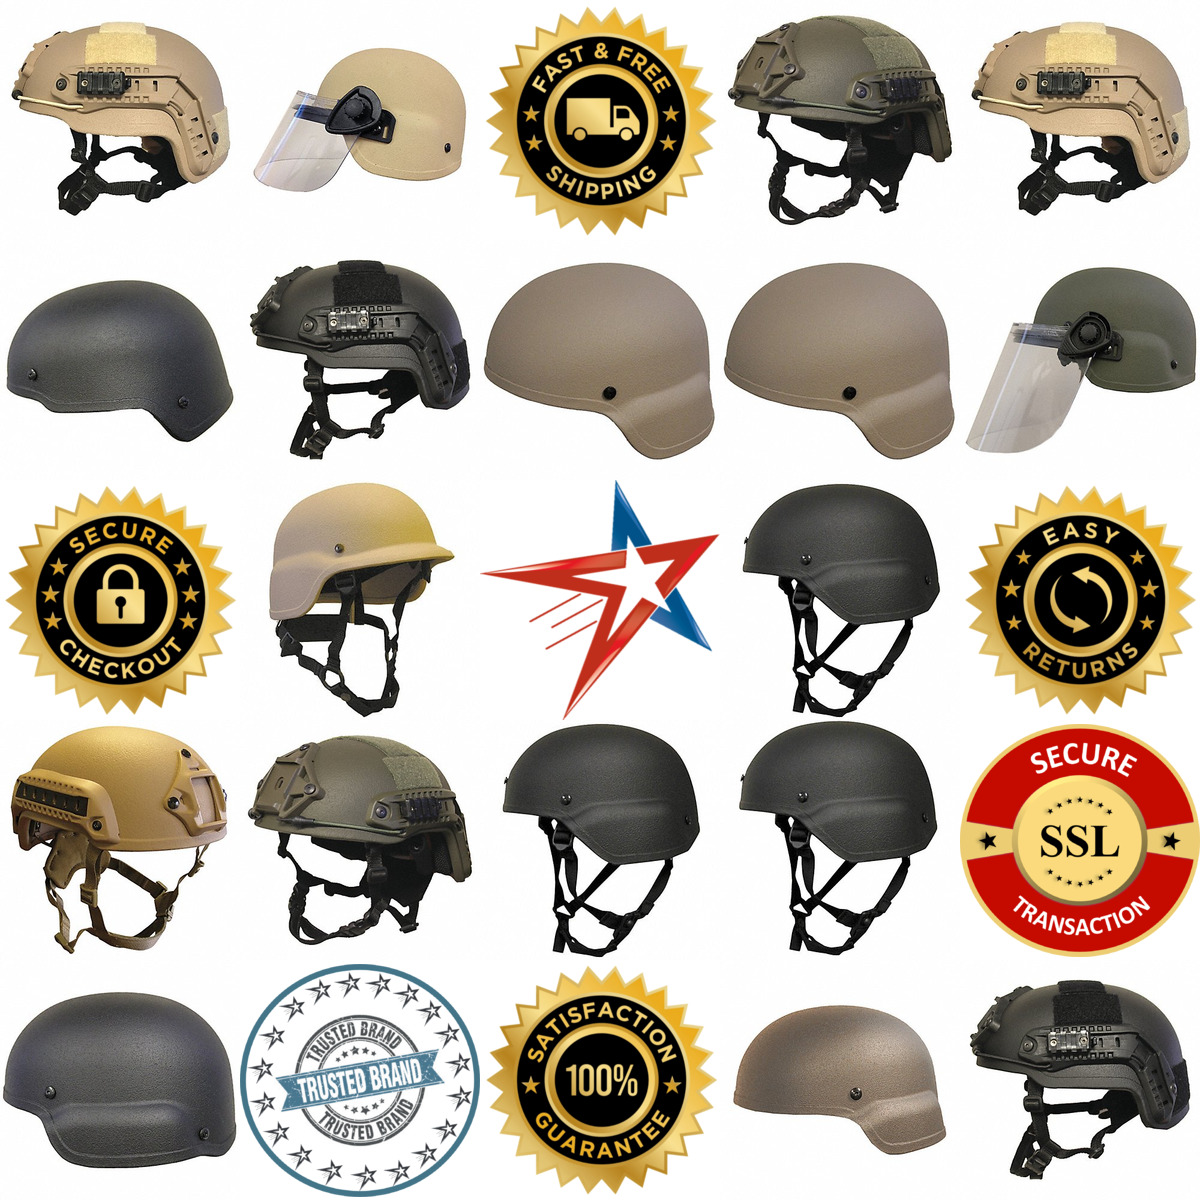 A selection of Ballistic Helmets products on GoVets